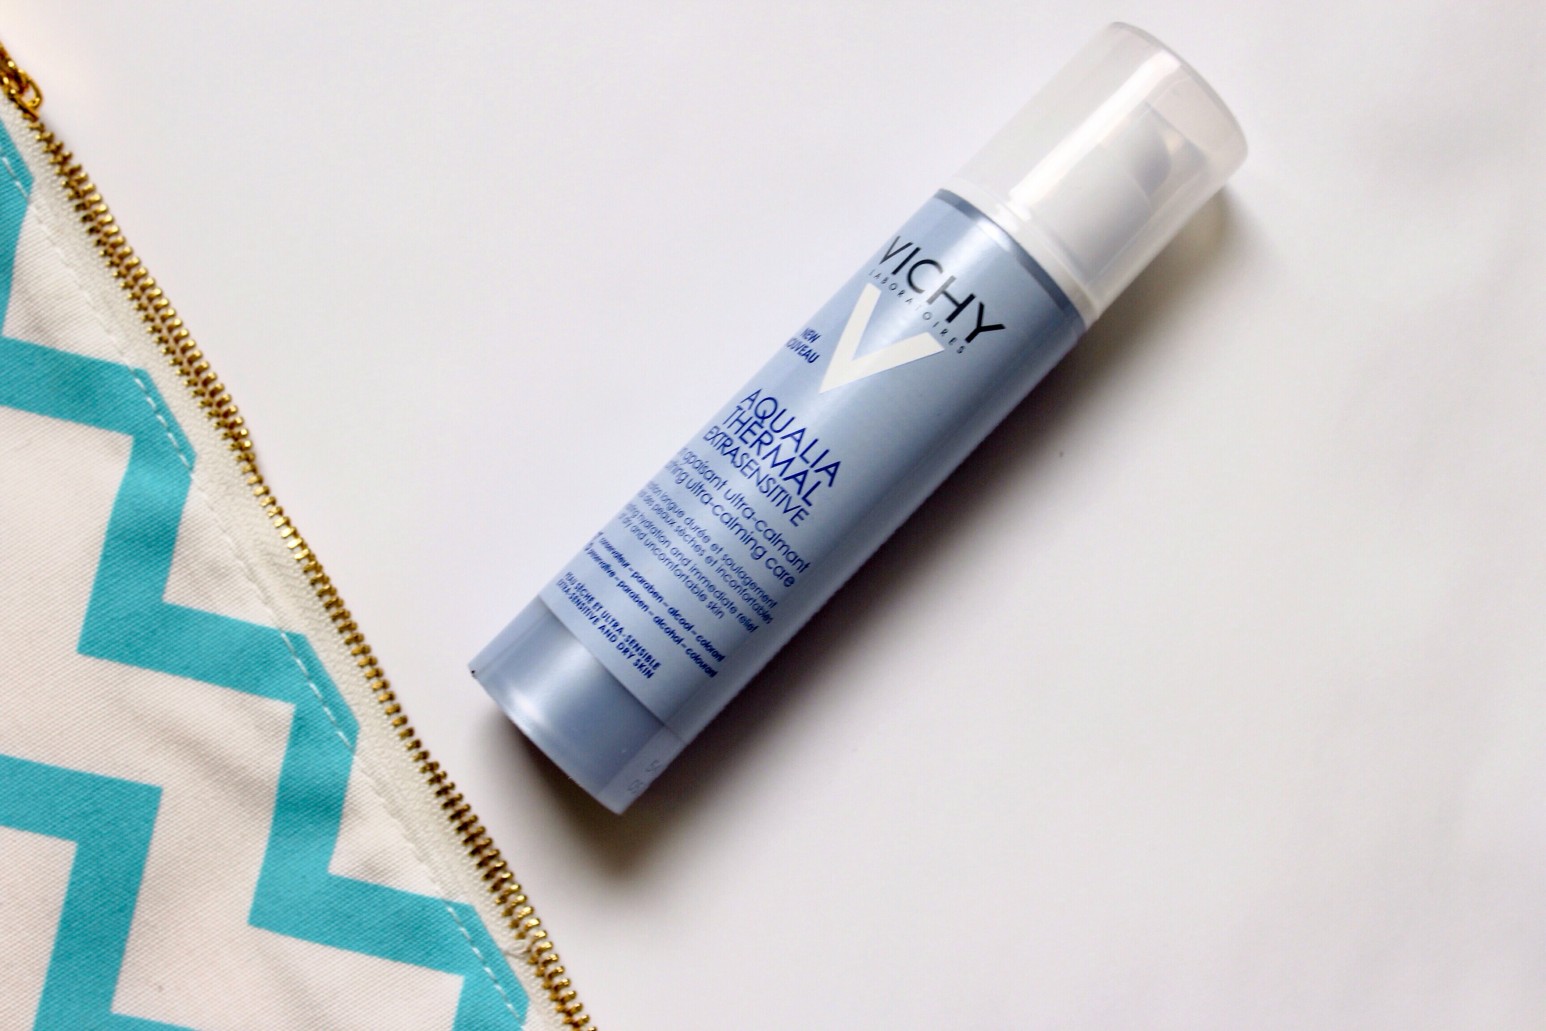 Review of Vichy Aqualia Thermal Extrasensitive